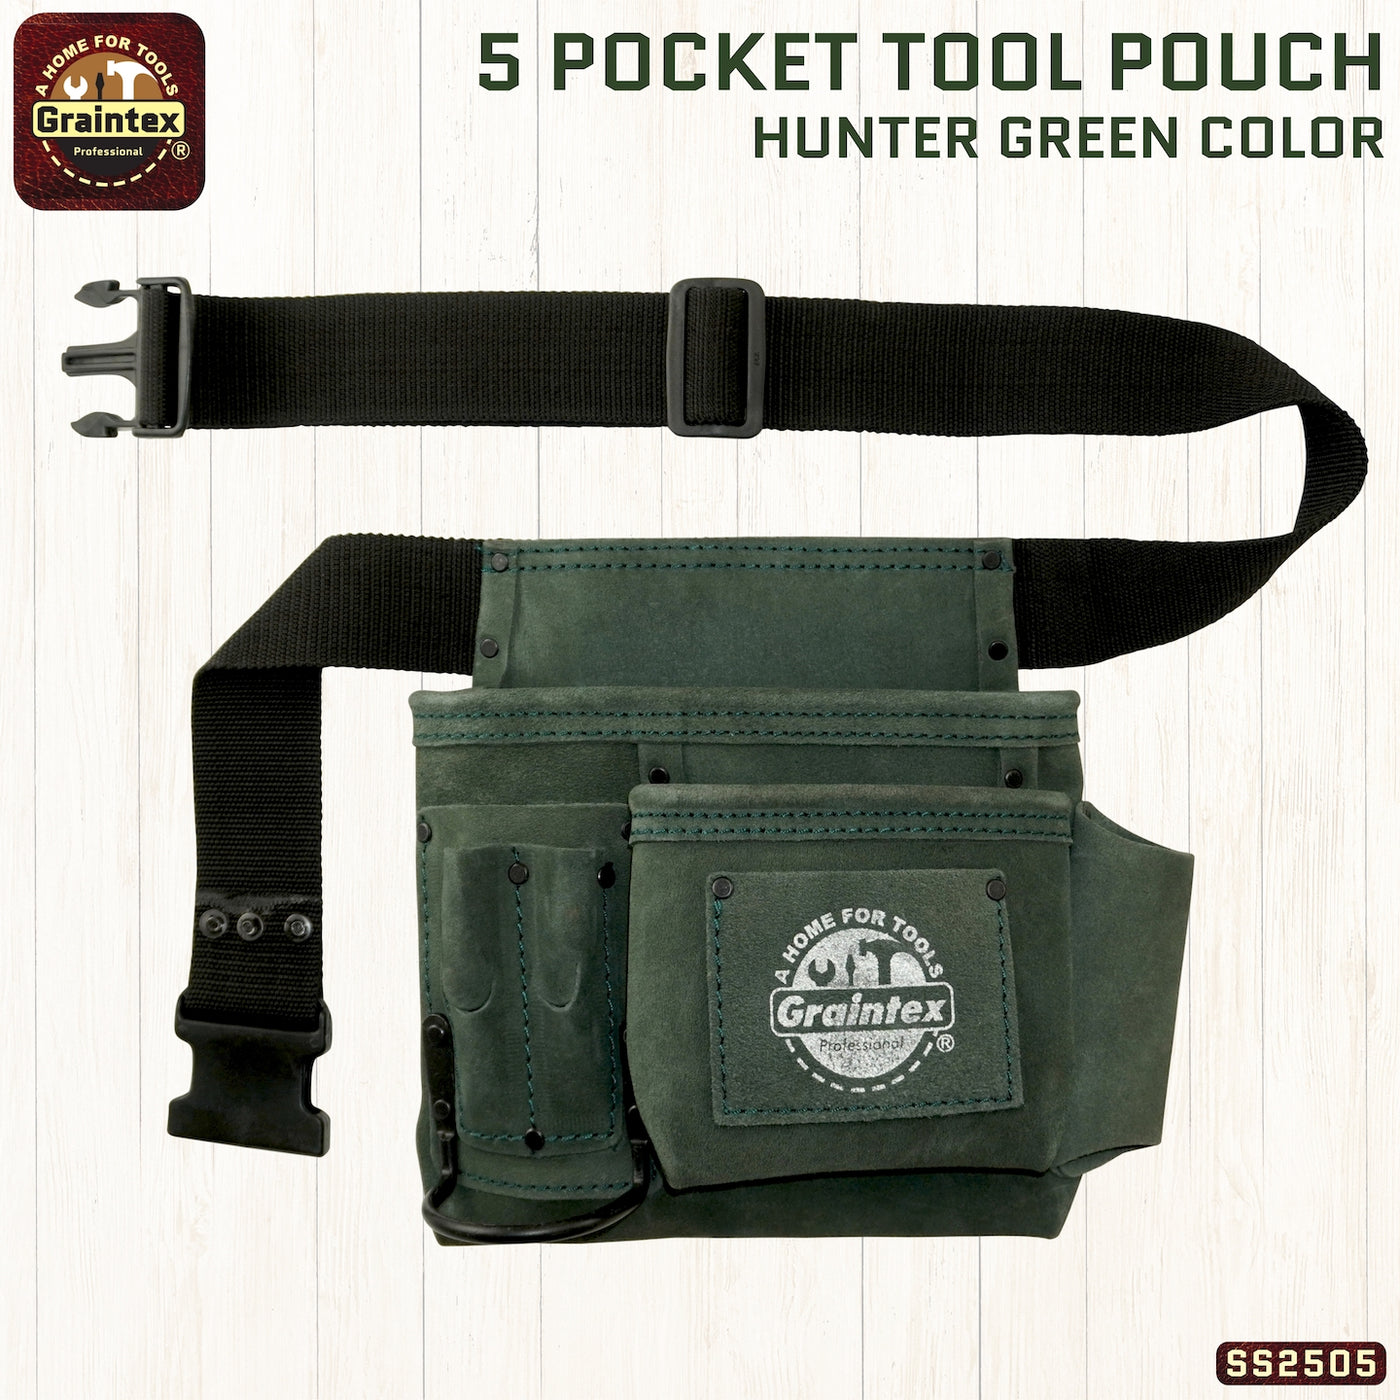 SS2505 :: 5 Pocket Nail & Tool Pouch Hunter Green Color Suede Leather with Belt